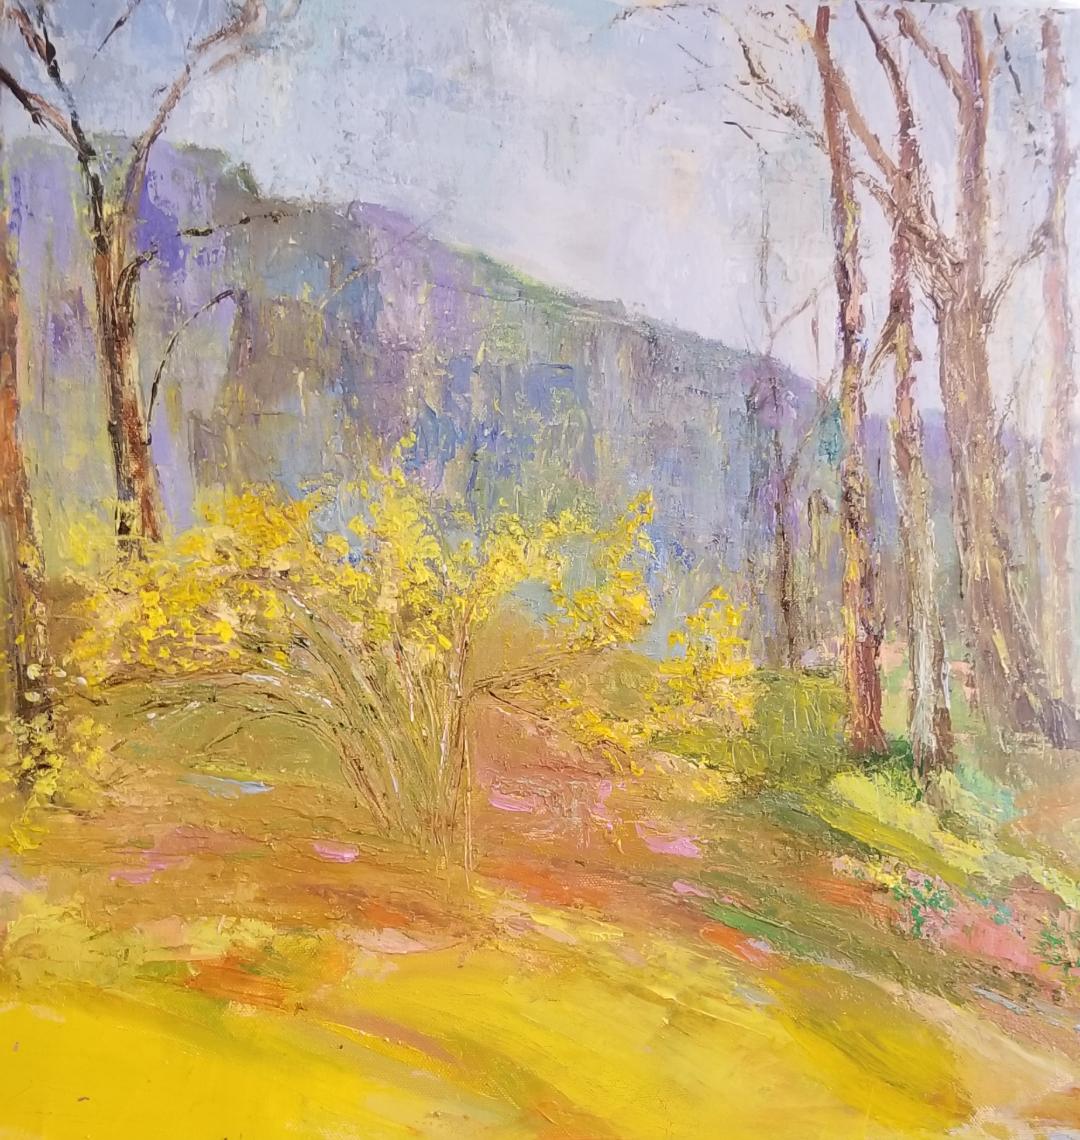 Yellows at the Time of Corona Waterbased Oil on Canvas, by Simone Alter Muri